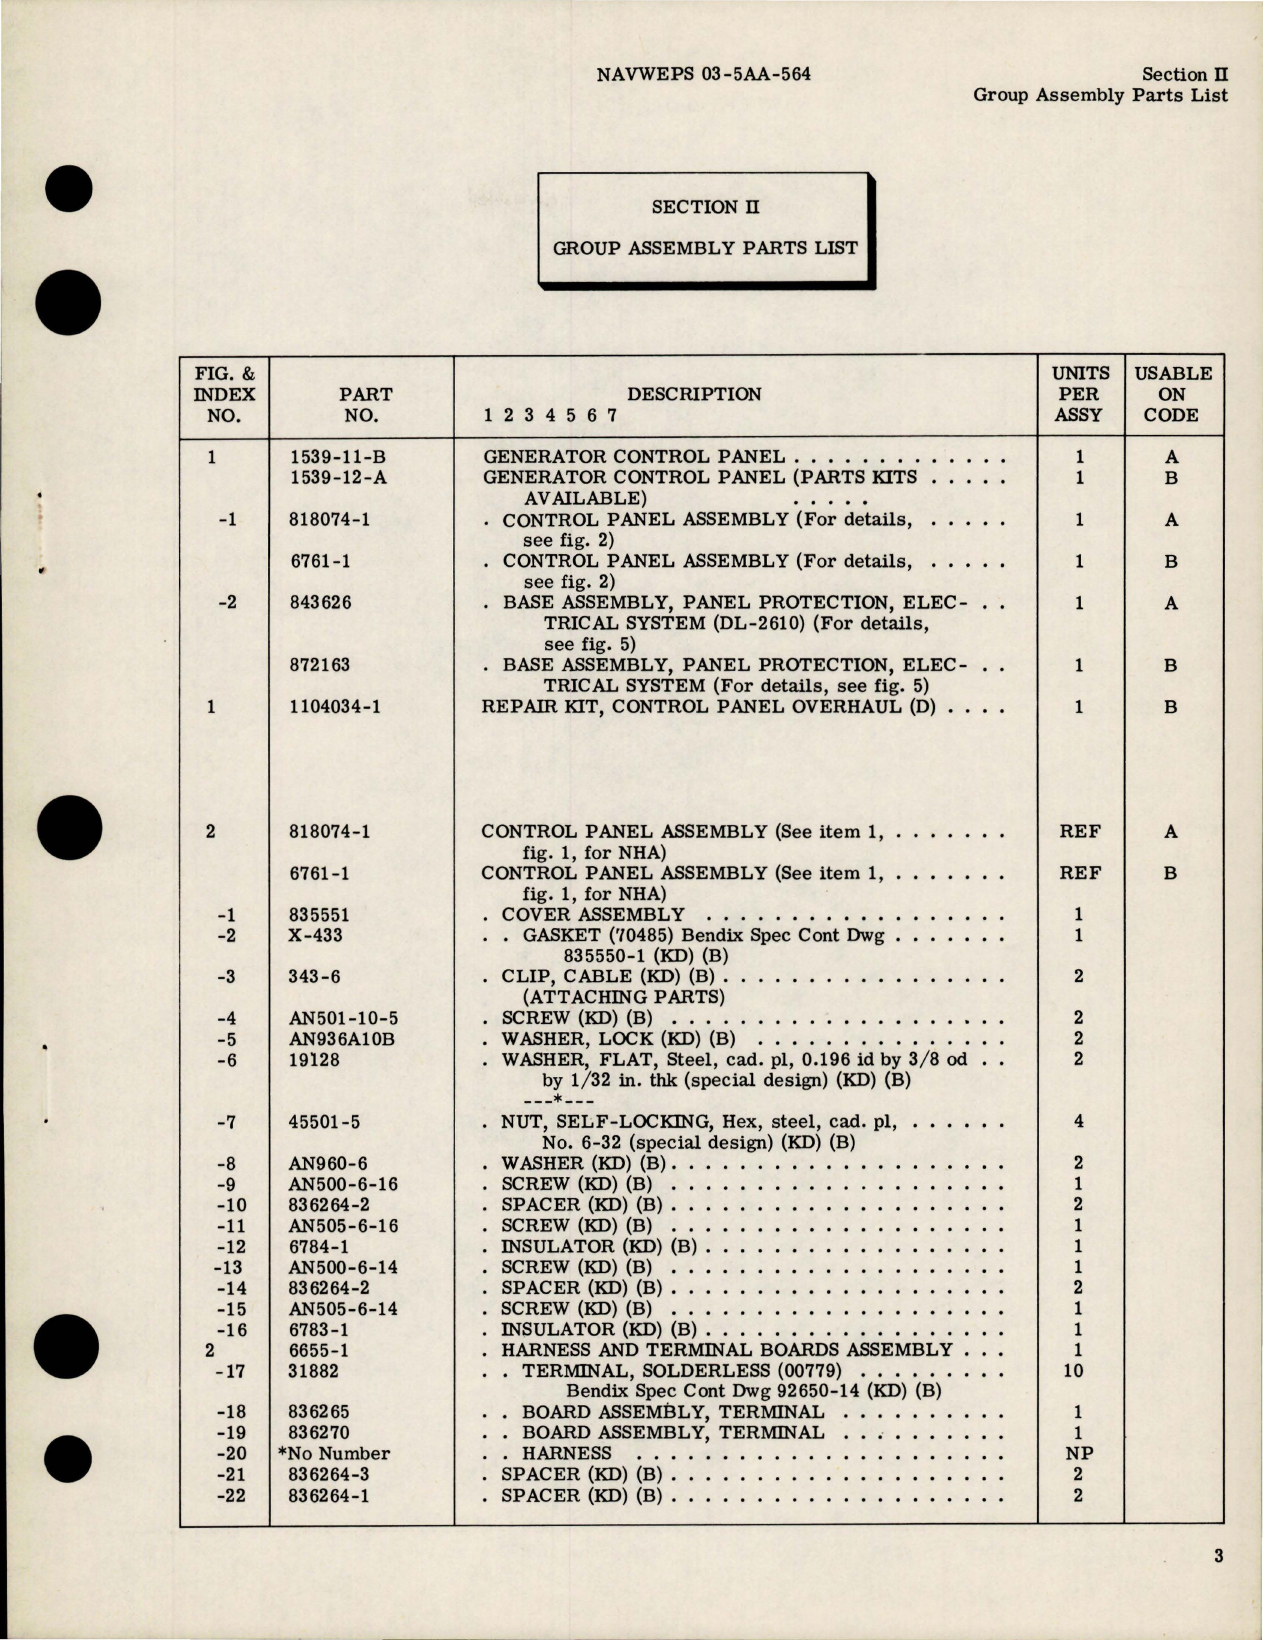 Sample page 5 from AirCorps Library document: Illustrated Parts Breakdown for Generator Control Panel - Type 1539-11-B and 1539-12-A